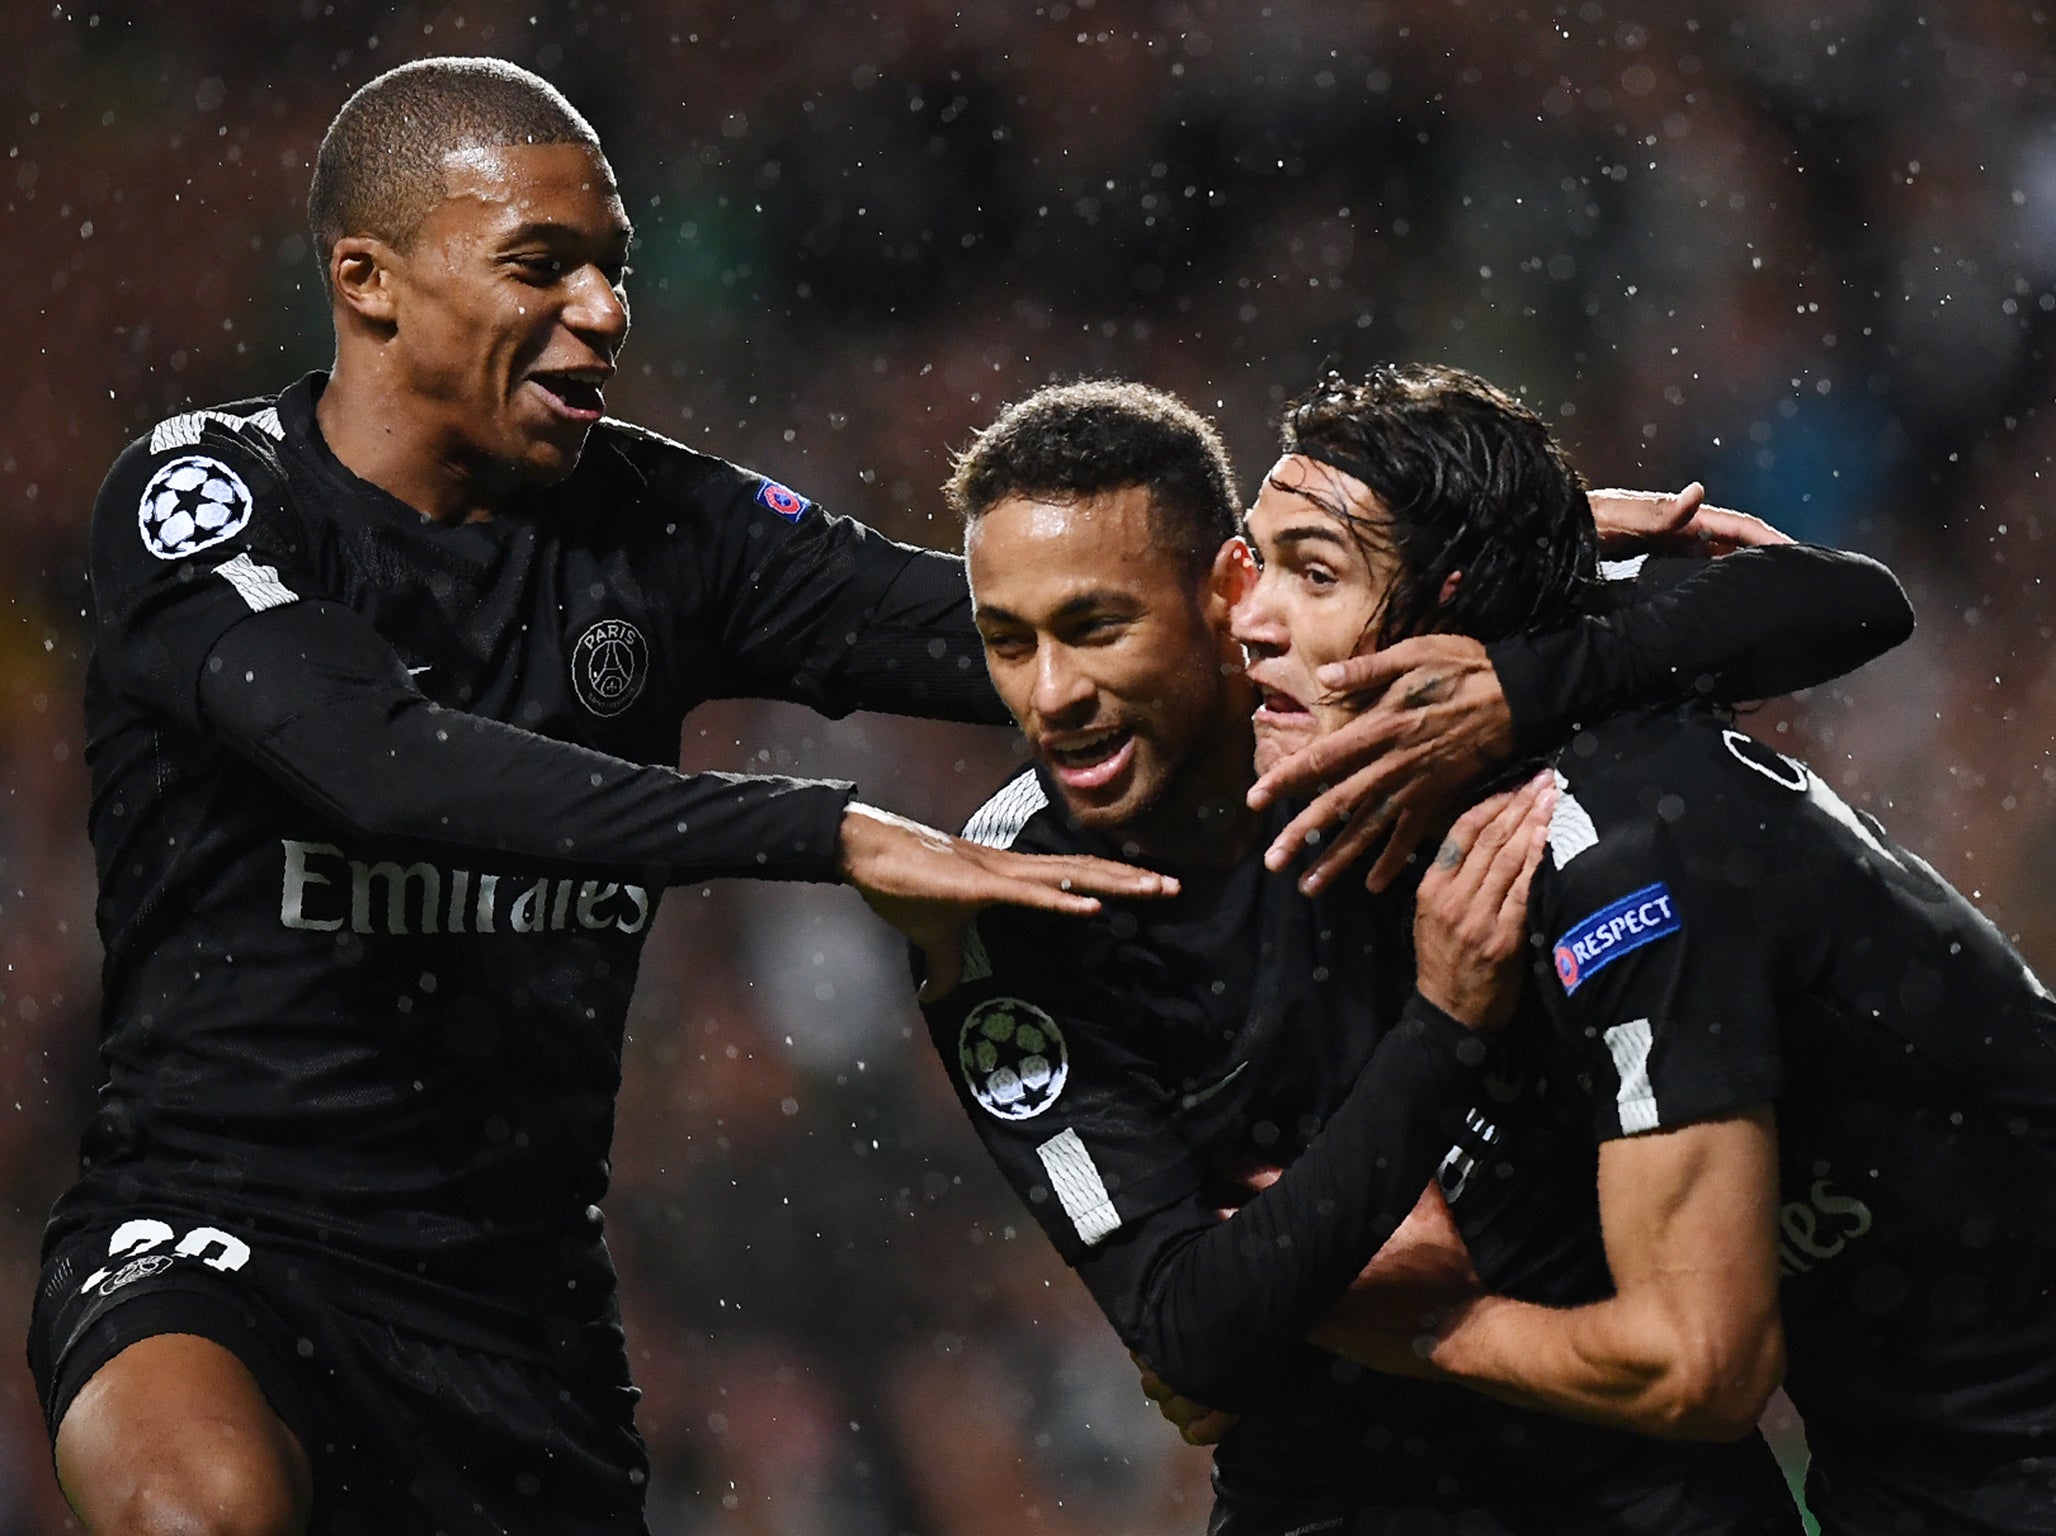 PSG's attack already looks exceptionally dangerous